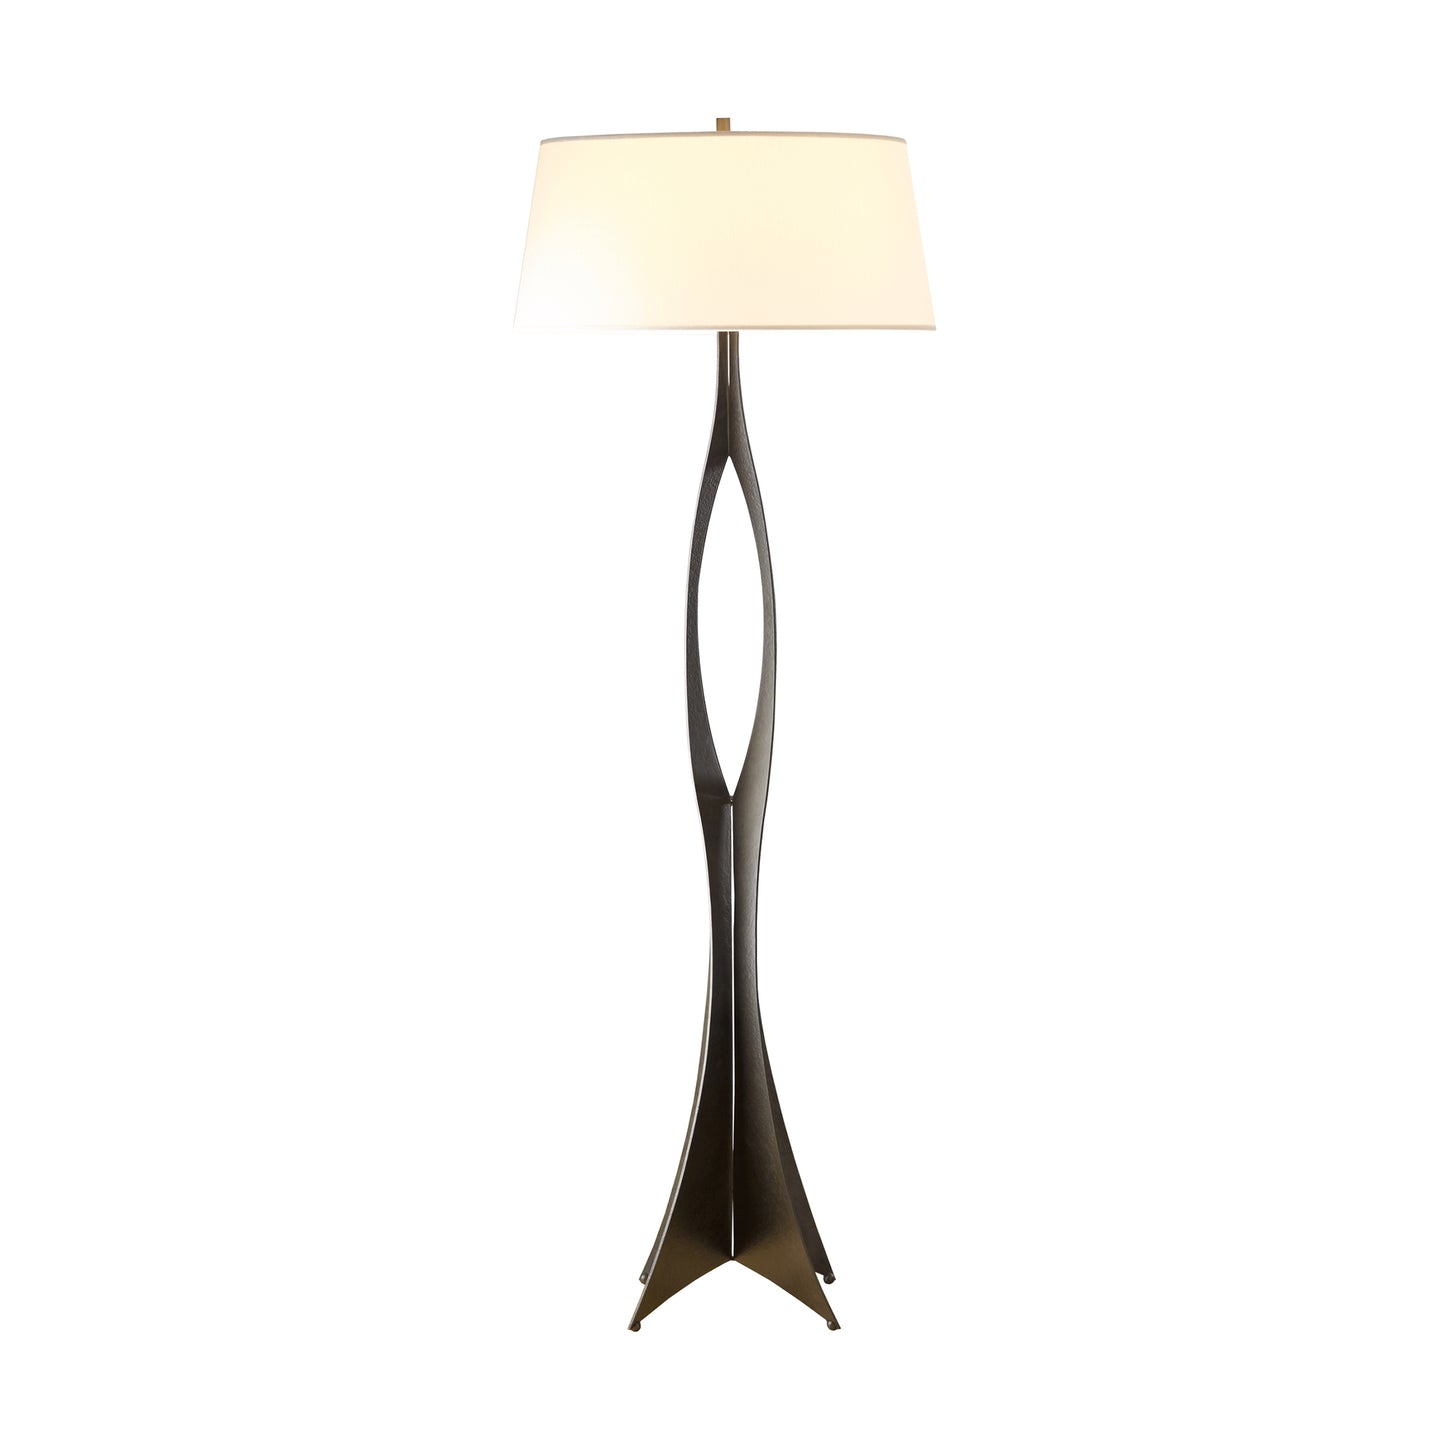 A Moreau Floor Lamp by Hubbardton Forge with a metal base and a white shade.